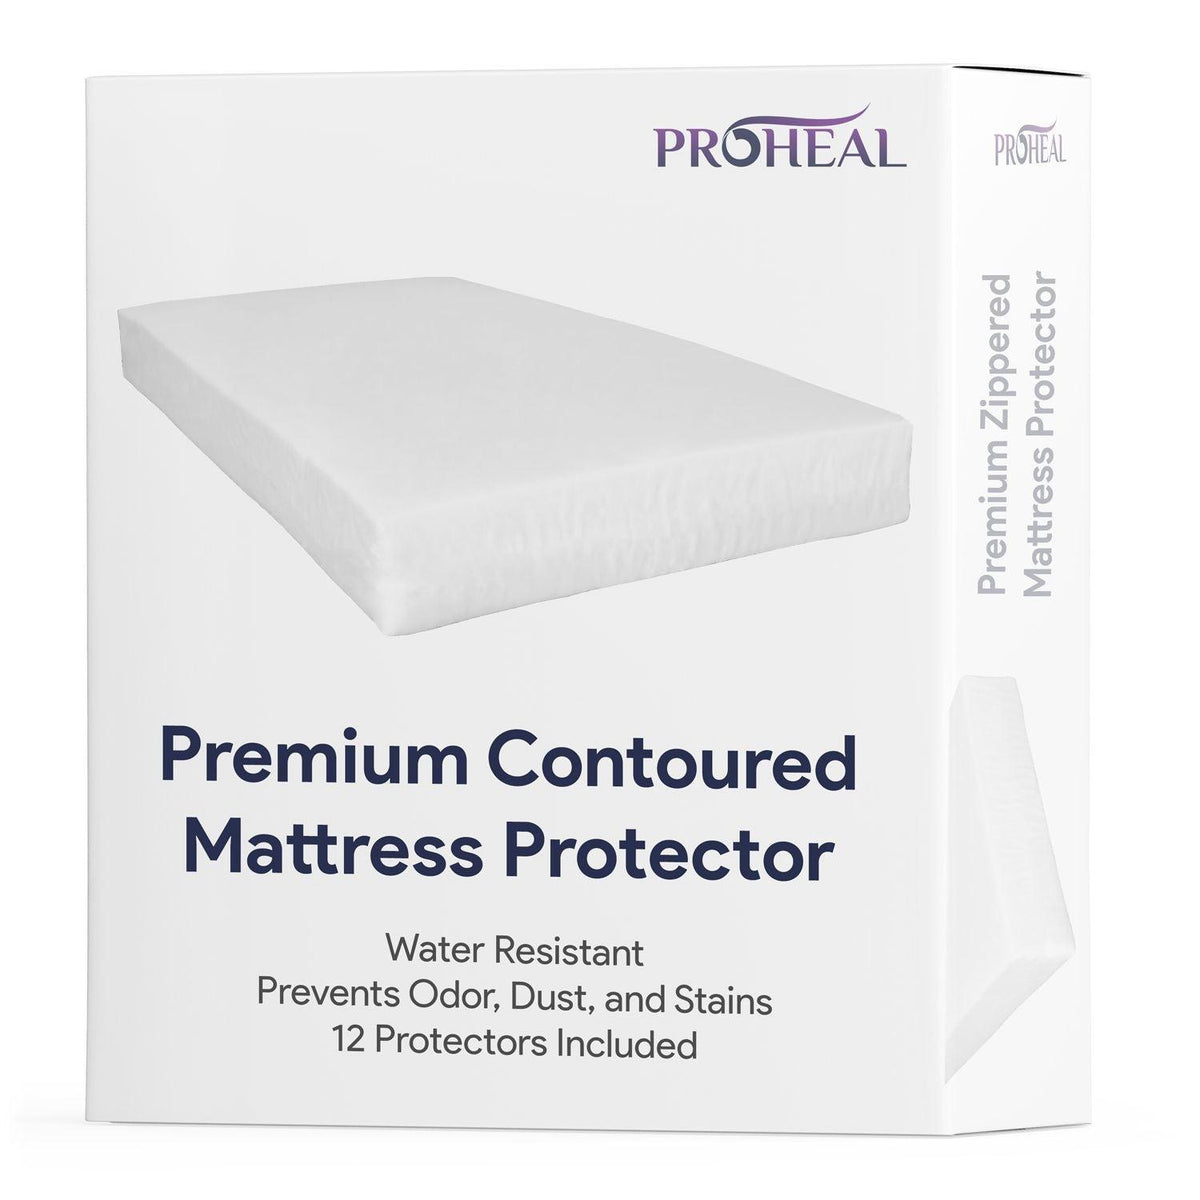 Proheal Hospital Bed Mattress Protector, Contoured, Water Resistant - Protects from Odor, Dust, and Stains - 36 inch x 80 inch x 6 inch - 12 Pieces